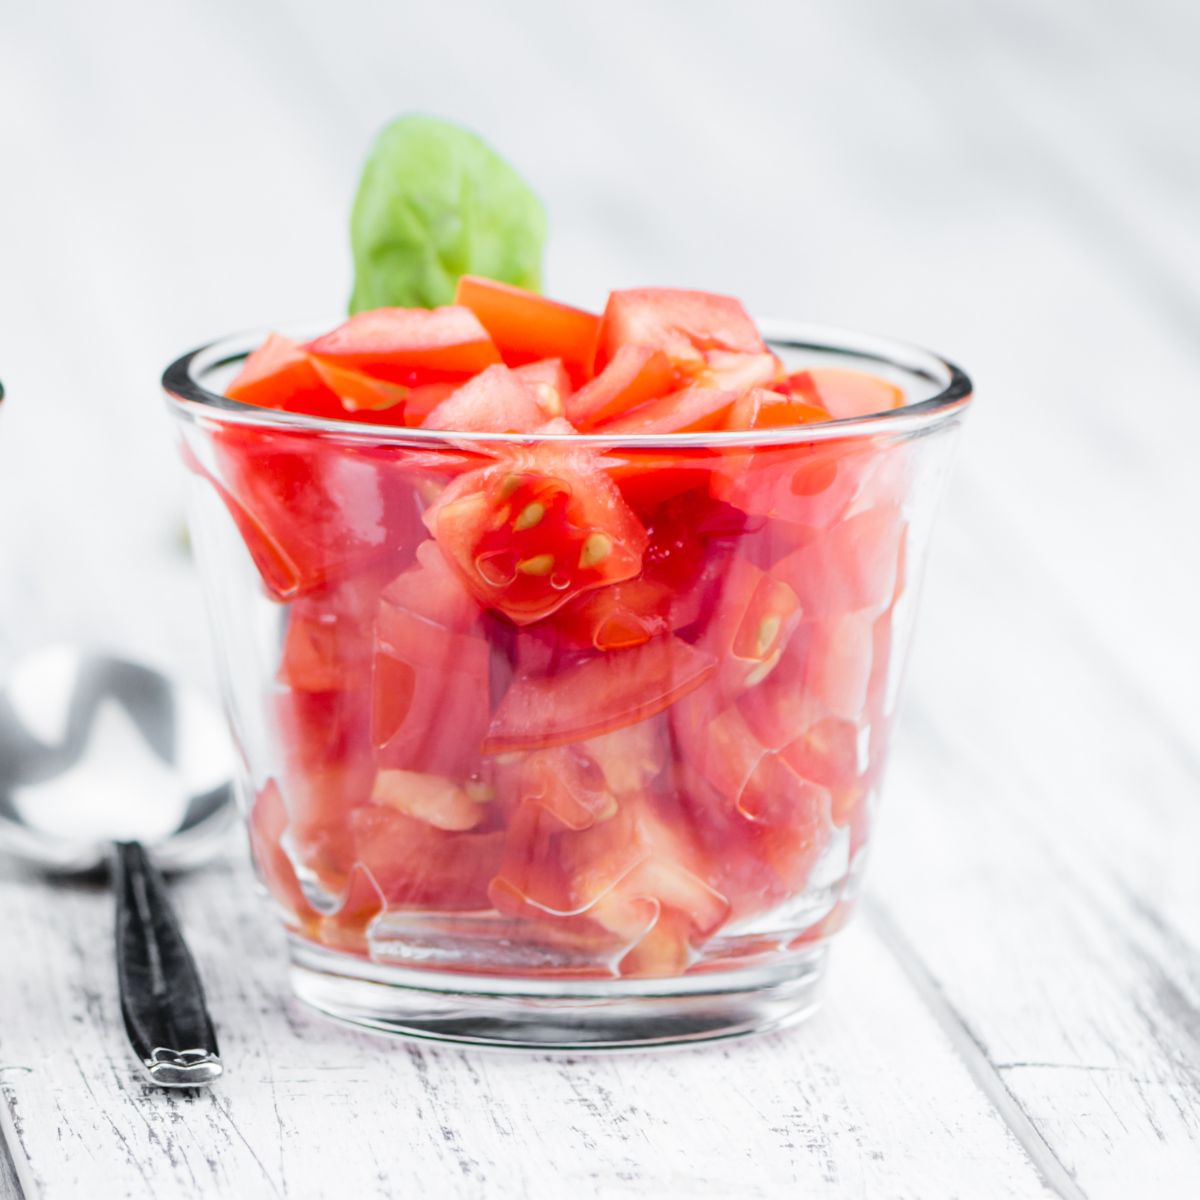 diced tomatoes in a glass jar